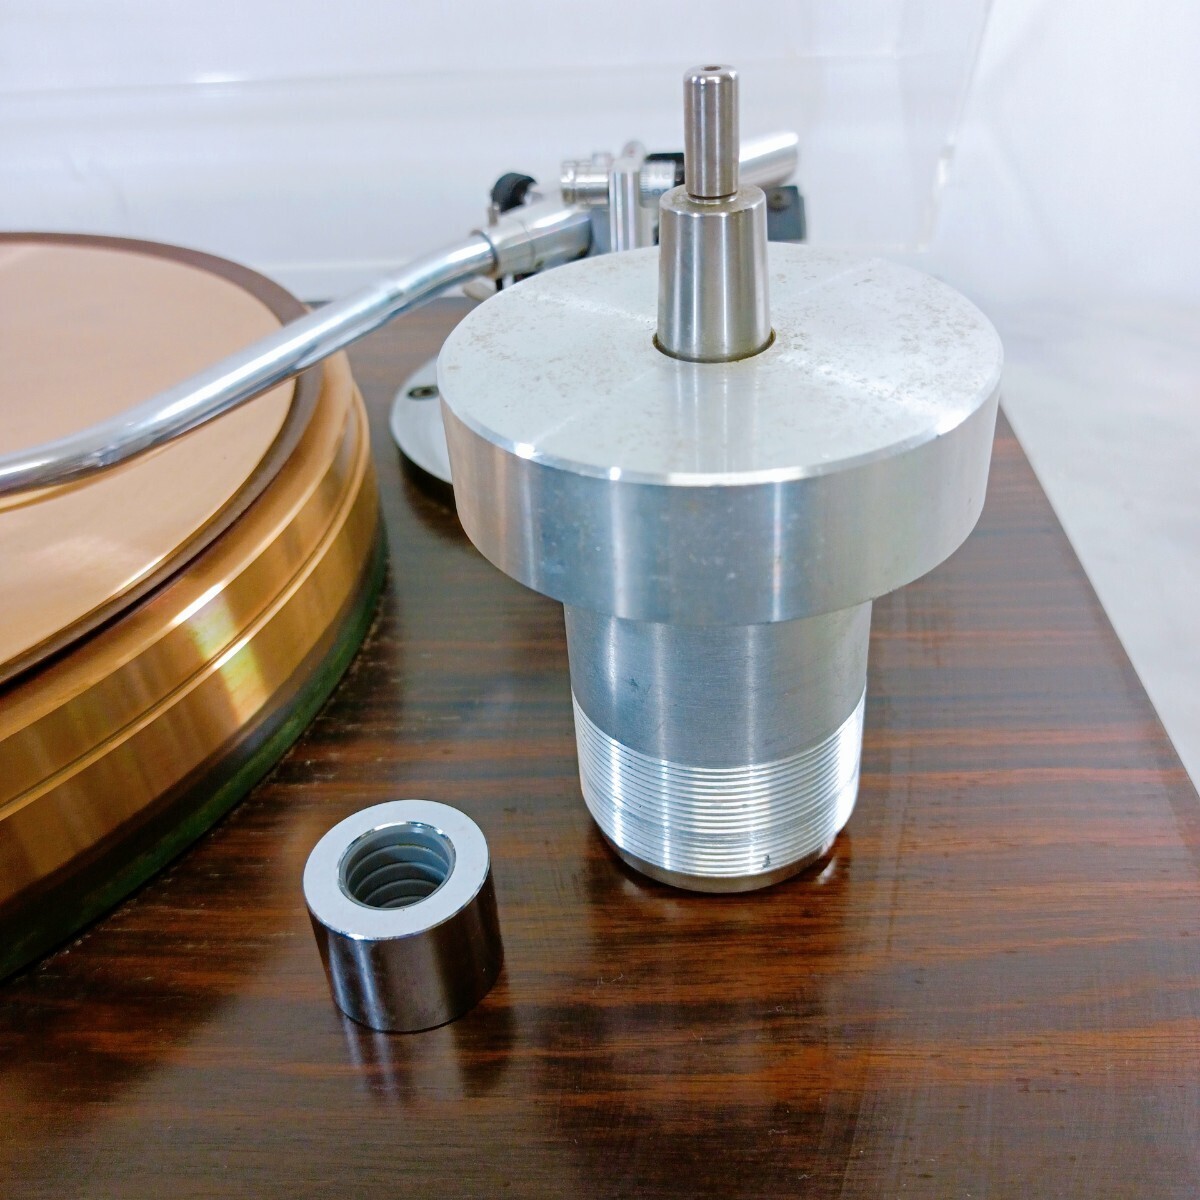 MICRO micro record player turntable BL-91 shaft assembly attaching electrification verification only Junk 